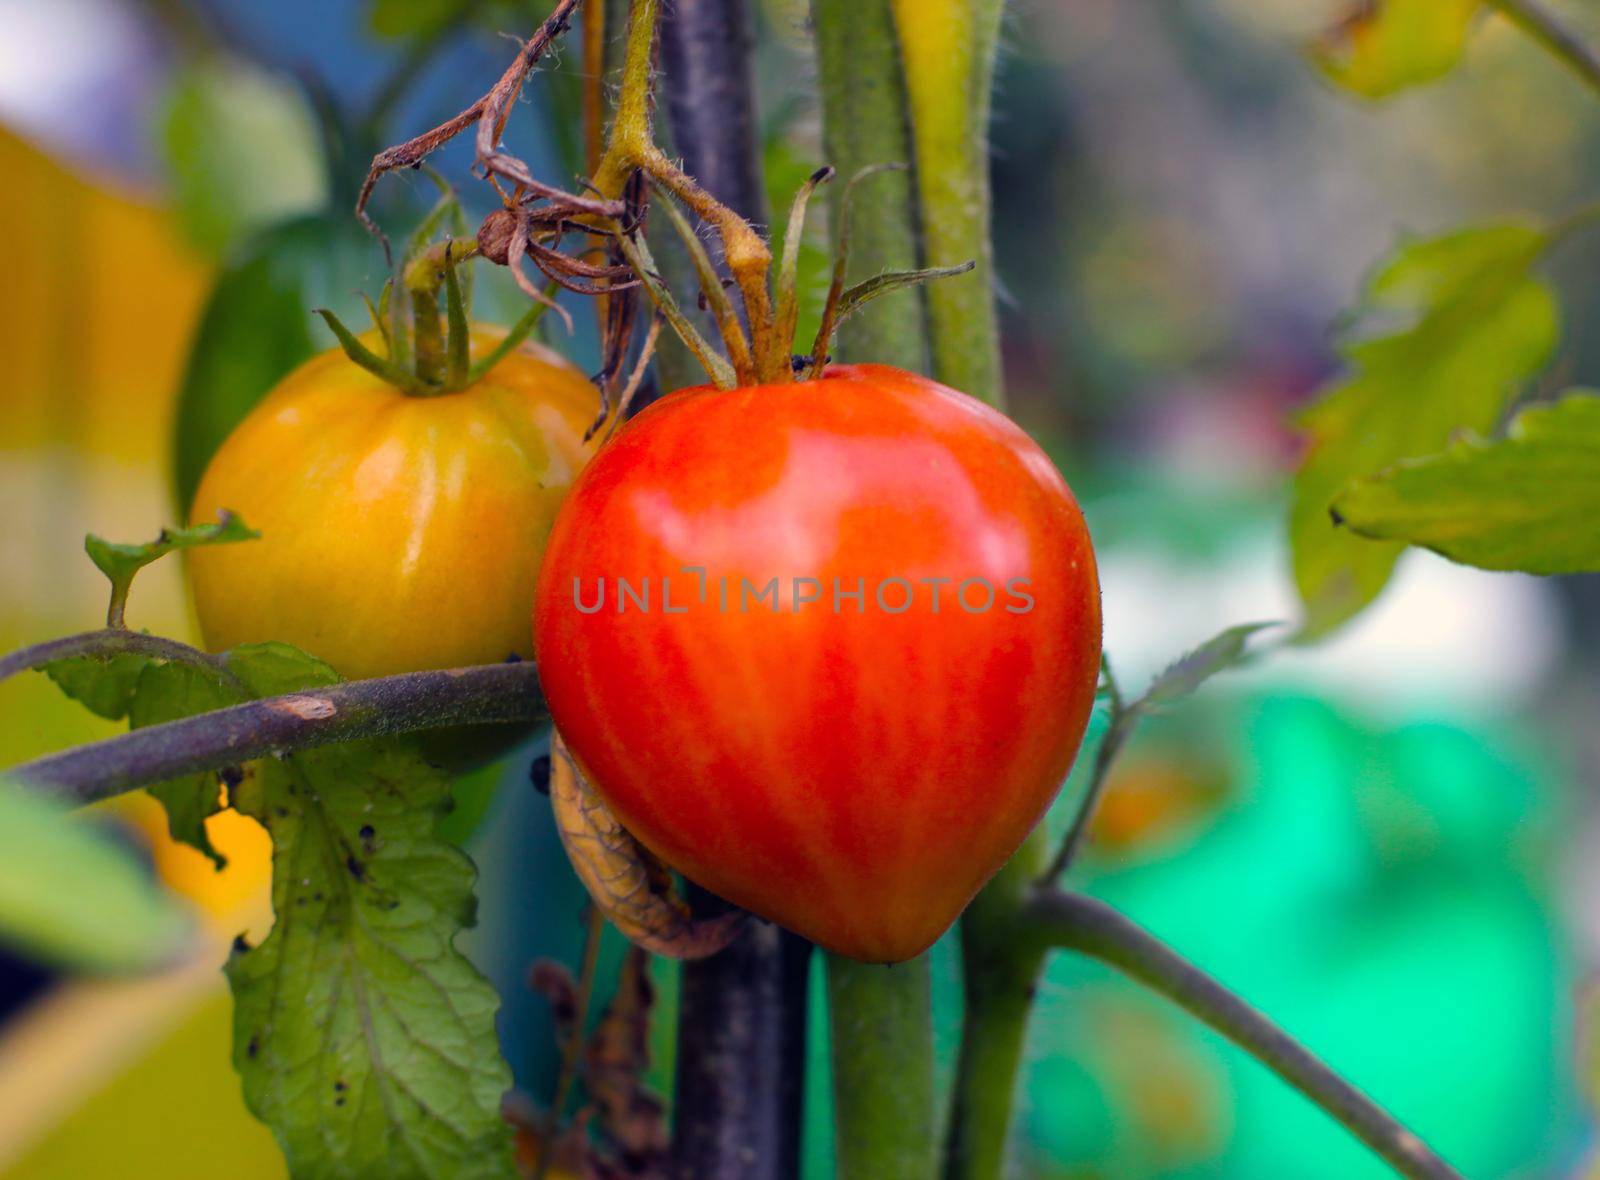 Fresh tomato ready for harvest by Lirch